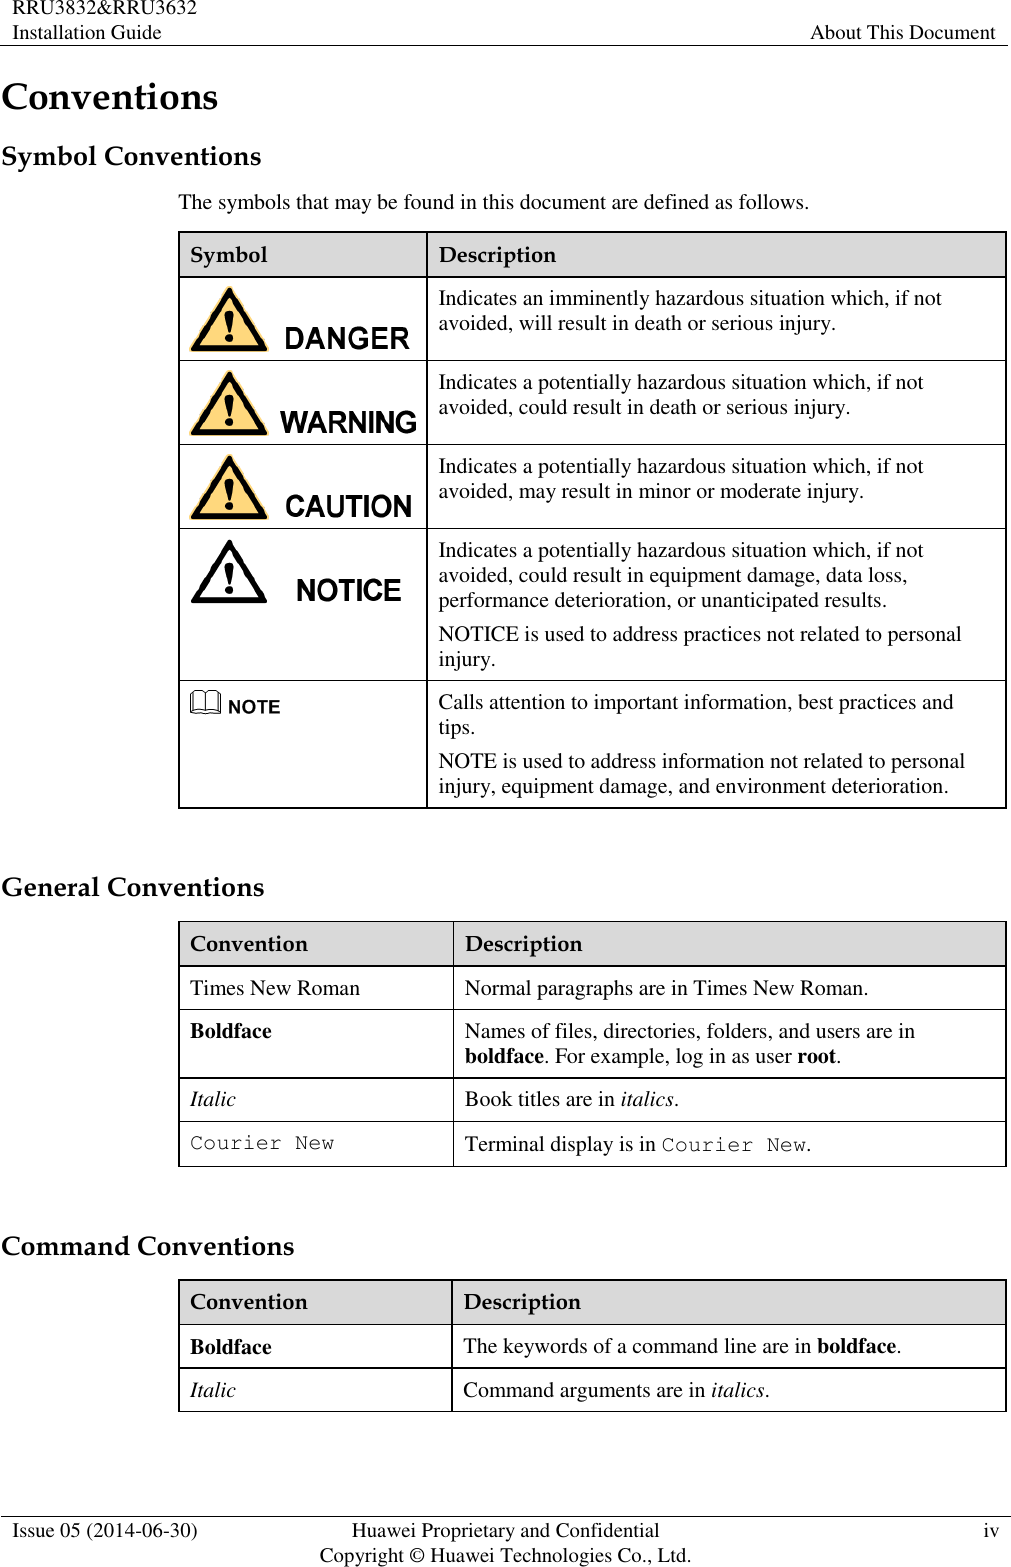 RRU3832&amp;RRU3632 Installation Guide About This Document  Issue 05 (2014-06-30) Huawei Proprietary and Confidential                                     Copyright © Huawei Technologies Co., Ltd. iv  Conventions Symbol Conventions The symbols that may be found in this document are defined as follows. Symbol Description  Indicates an imminently hazardous situation which, if not avoided, will result in death or serious injury.  Indicates a potentially hazardous situation which, if not avoided, could result in death or serious injury.  Indicates a potentially hazardous situation which, if not avoided, may result in minor or moderate injury.  Indicates a potentially hazardous situation which, if not avoided, could result in equipment damage, data loss, performance deterioration, or unanticipated results. NOTICE is used to address practices not related to personal injury.  Calls attention to important information, best practices and tips. NOTE is used to address information not related to personal injury, equipment damage, and environment deterioration.  General Conventions Convention Description Times New Roman Normal paragraphs are in Times New Roman. Boldface Names of files, directories, folders, and users are in boldface. For example, log in as user root. Italic Book titles are in italics. Courier New Terminal display is in Courier New.  Command Conventions Convention Description Boldface The keywords of a command line are in boldface. Italic Command arguments are in italics. 